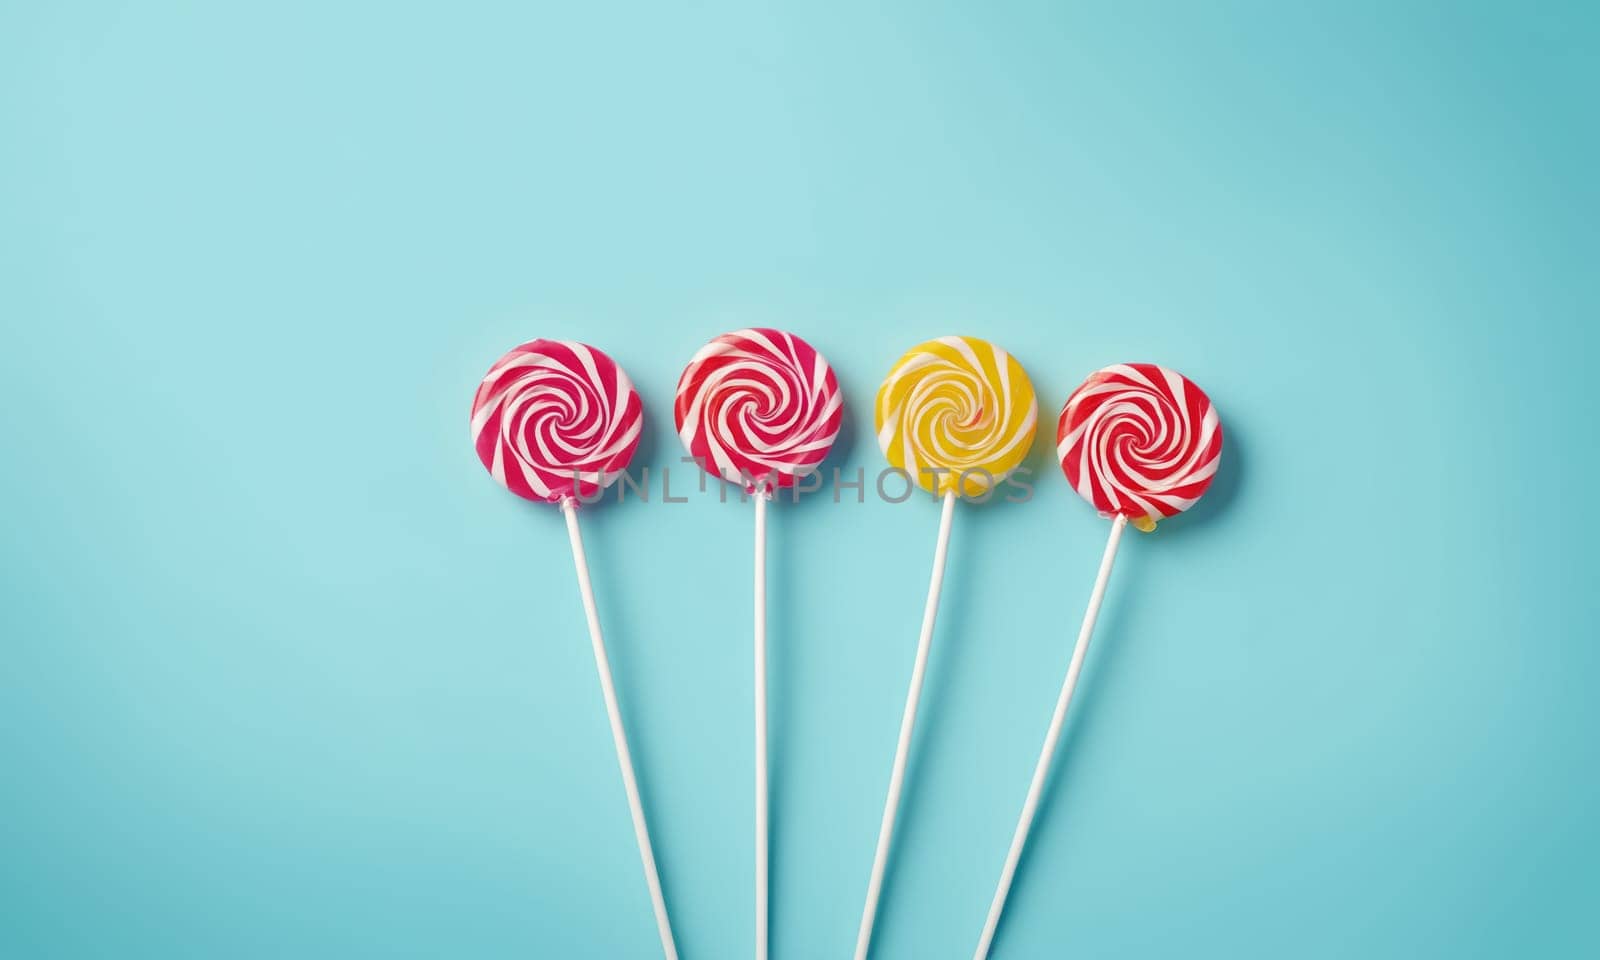 Colorful lollipops on blue background. Top view. by Andre1ns